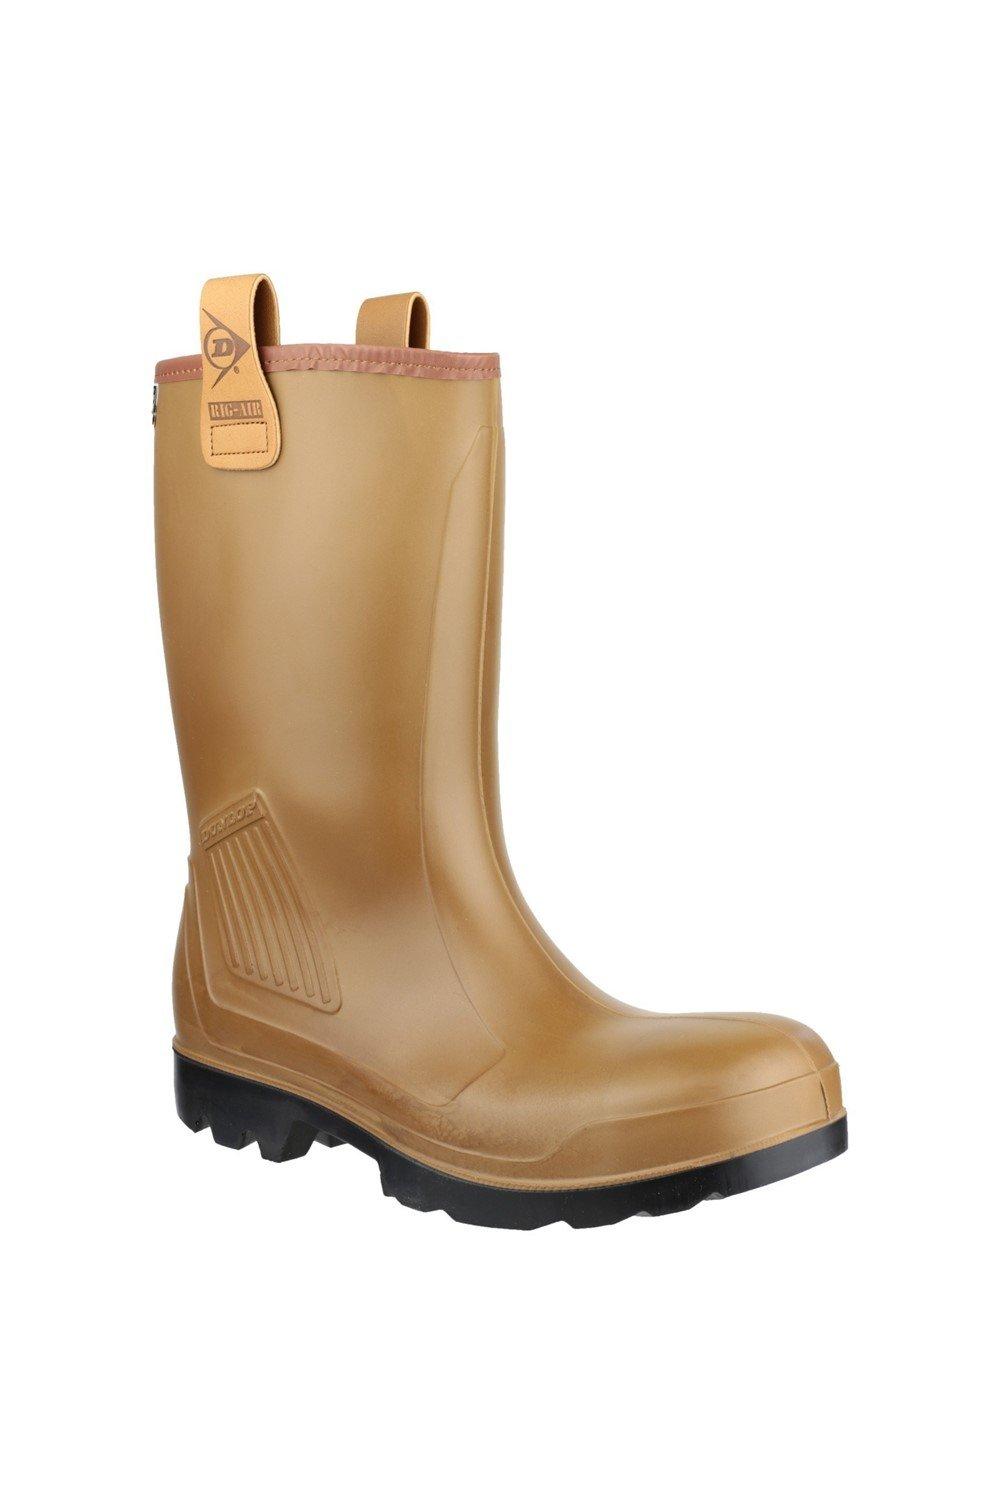 'Rig Air' Safety Wellington Boots